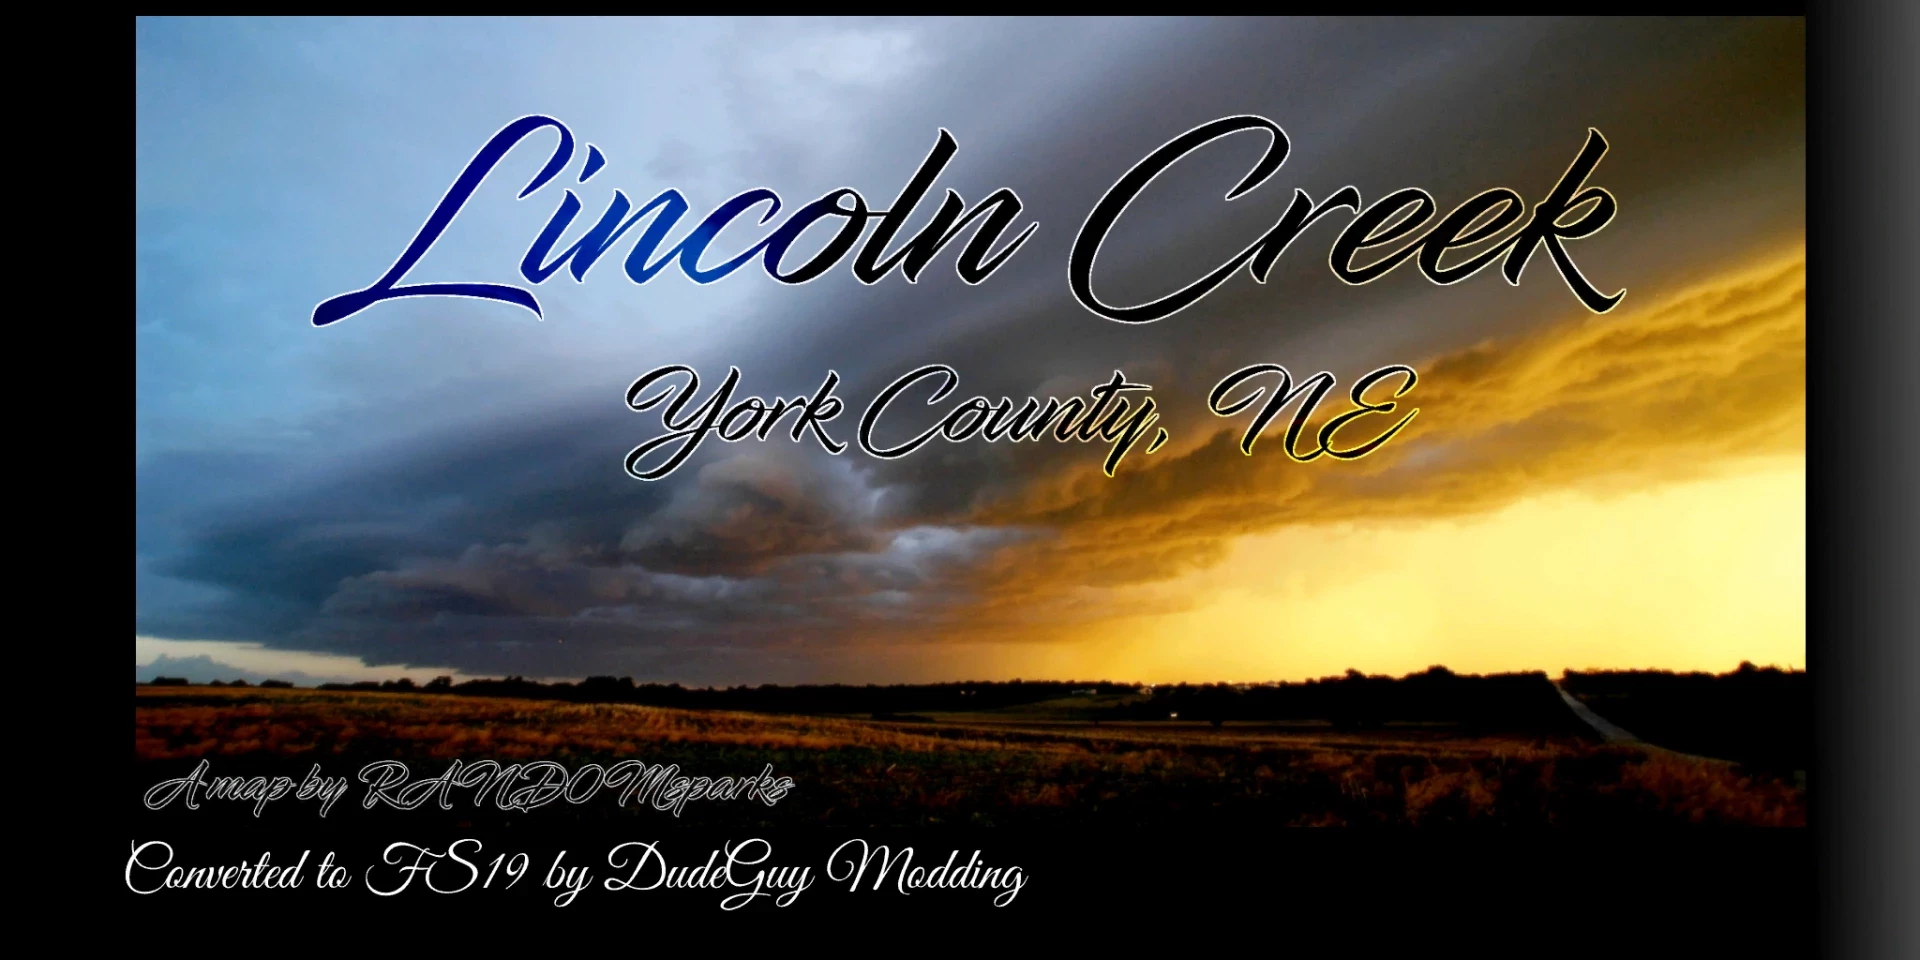 LINCOLN CREEK CONVERTED BY DUDEGUY MODDING